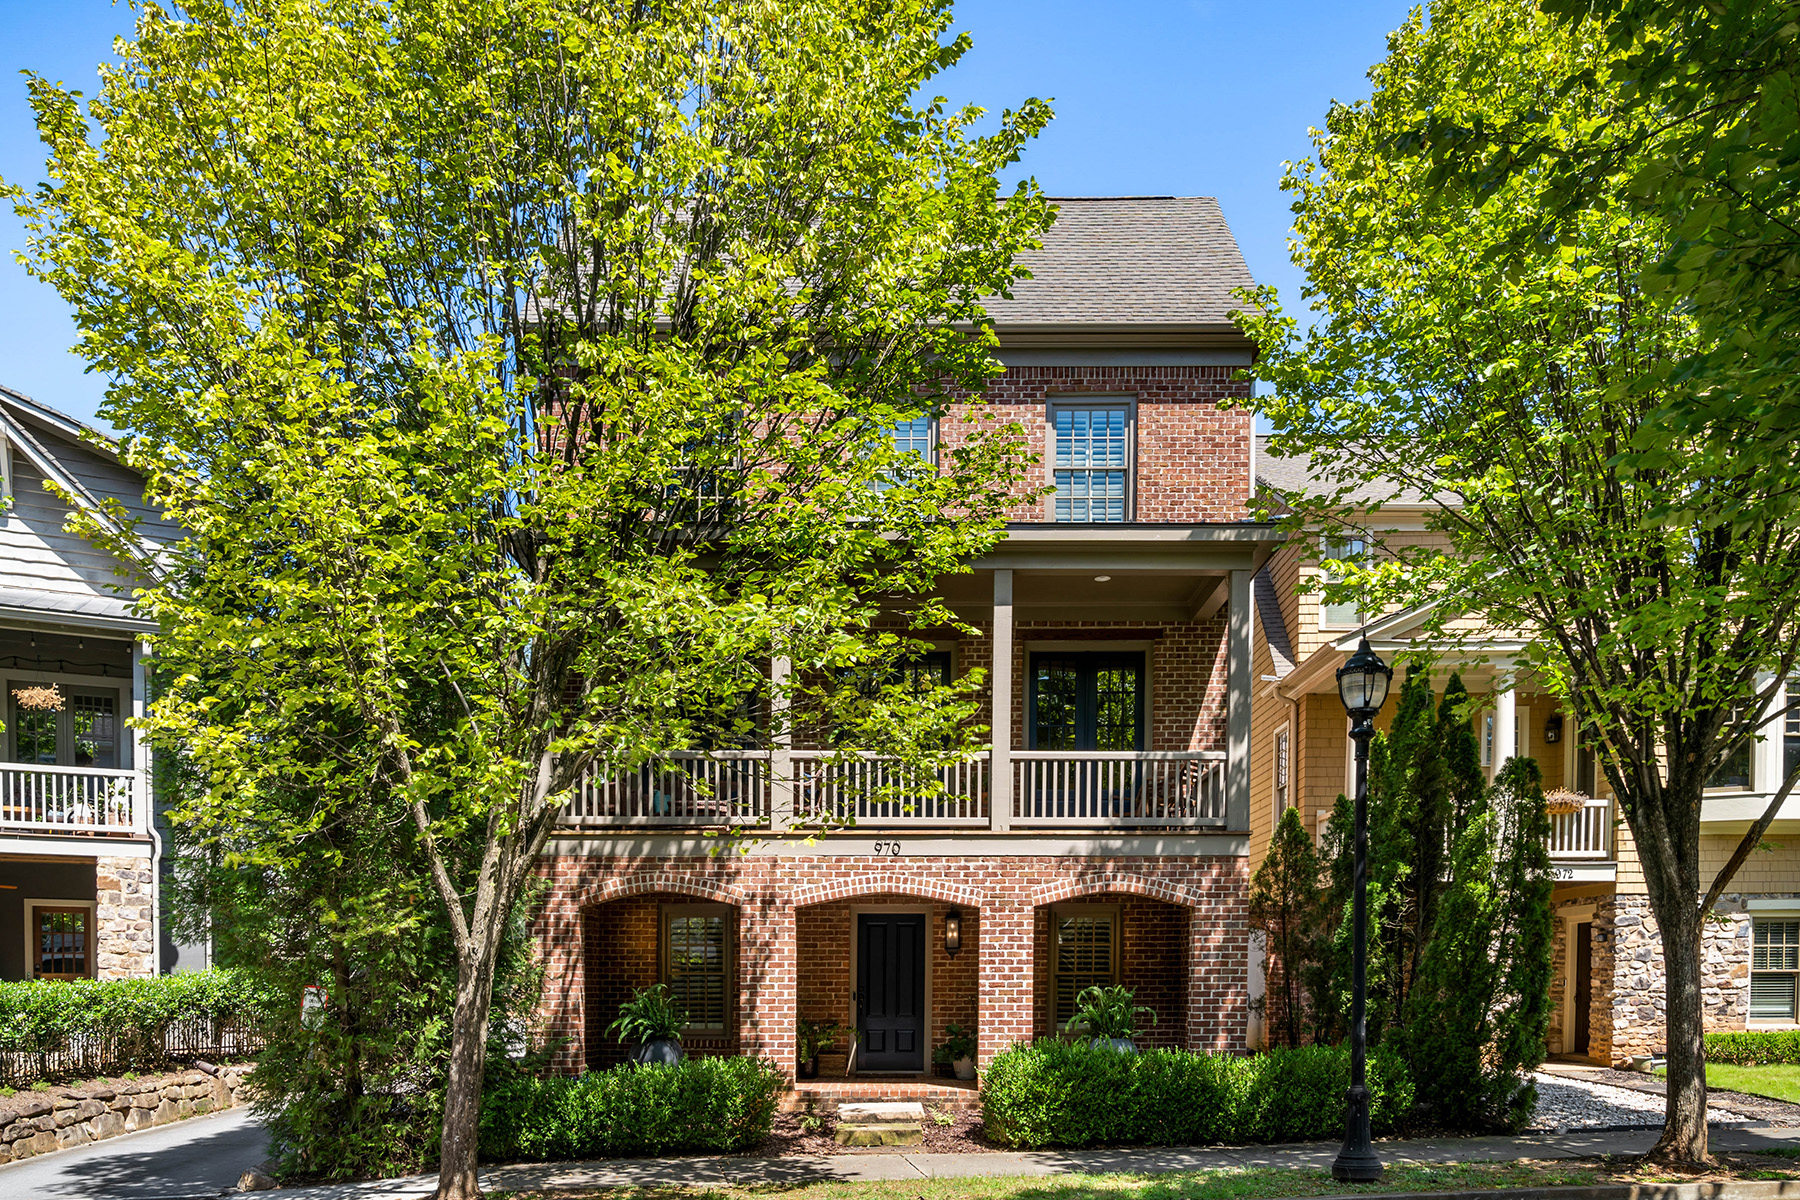 A Certified EarthCraft Sanctuary Nestled In The Heart Of Coveted Glenwood Park